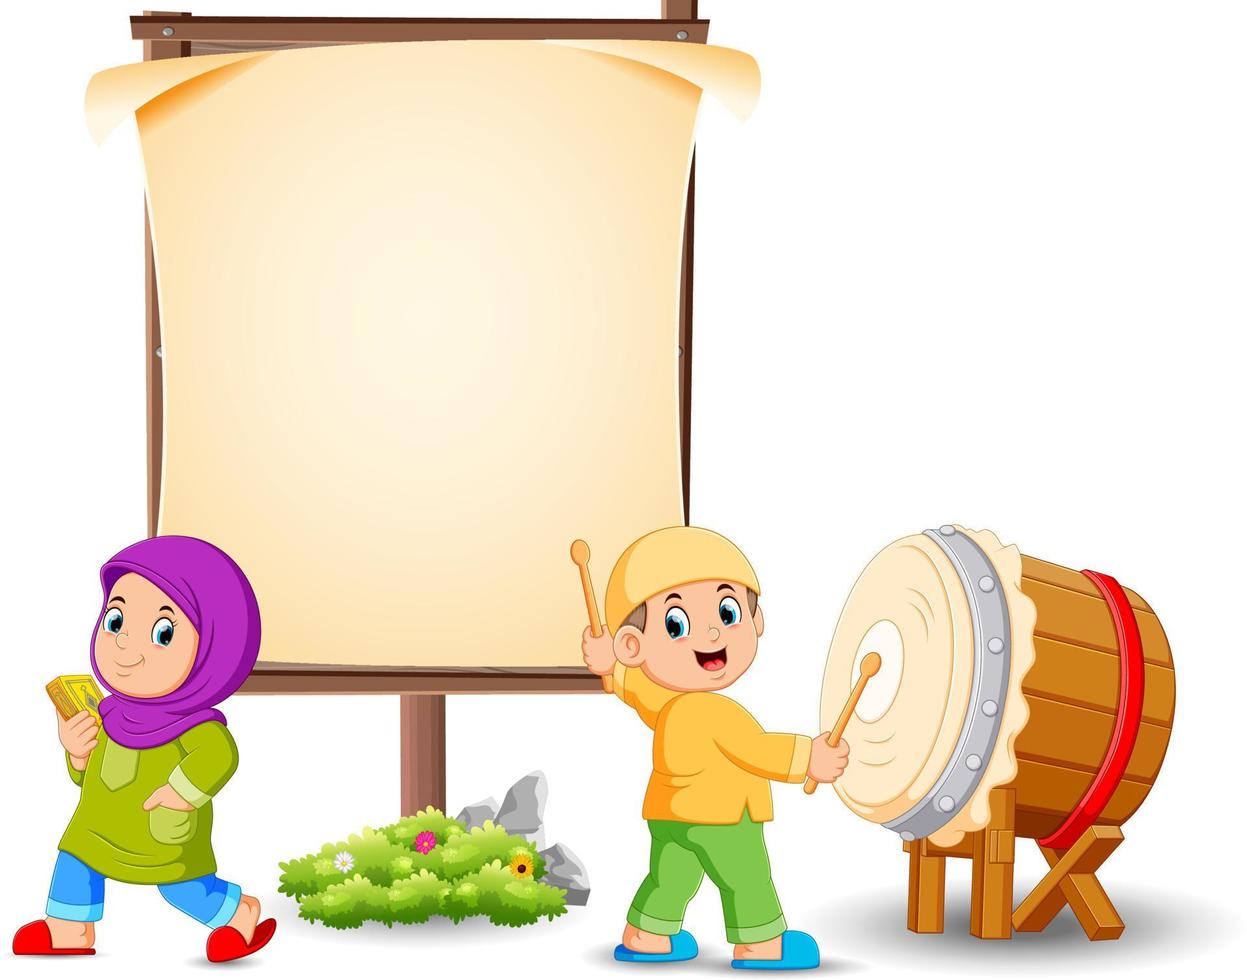 the girl is posing near the blank banner and the boy is hitting the drum vector